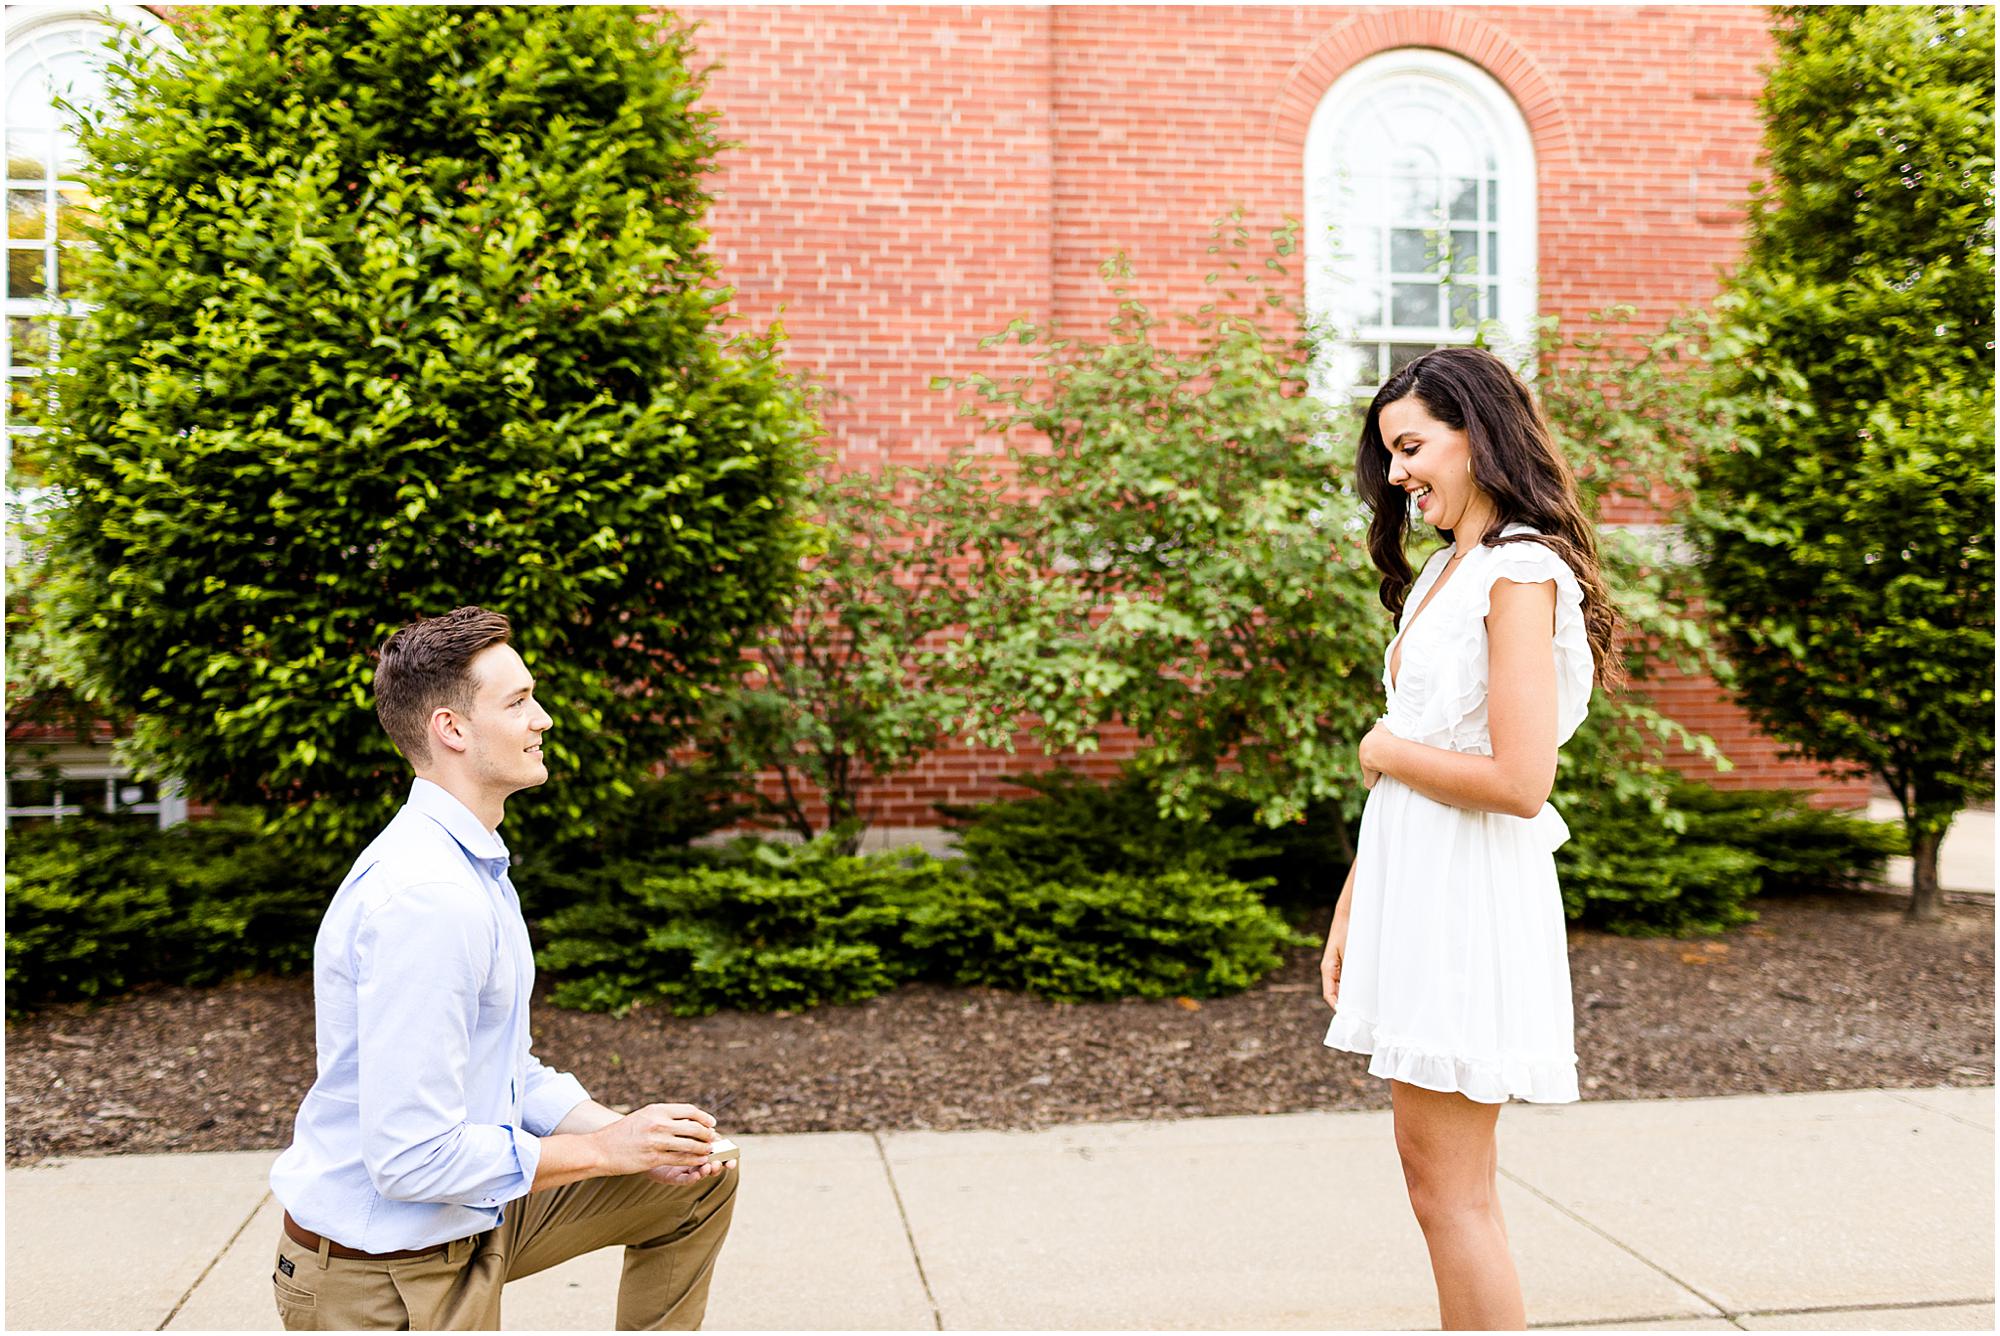 Caitlin-and-Luke-Photography-Illinois-State-University-Proposal-Photos-Normal-IL-engagement-session-Illinois-State-proposal_1073.jpg